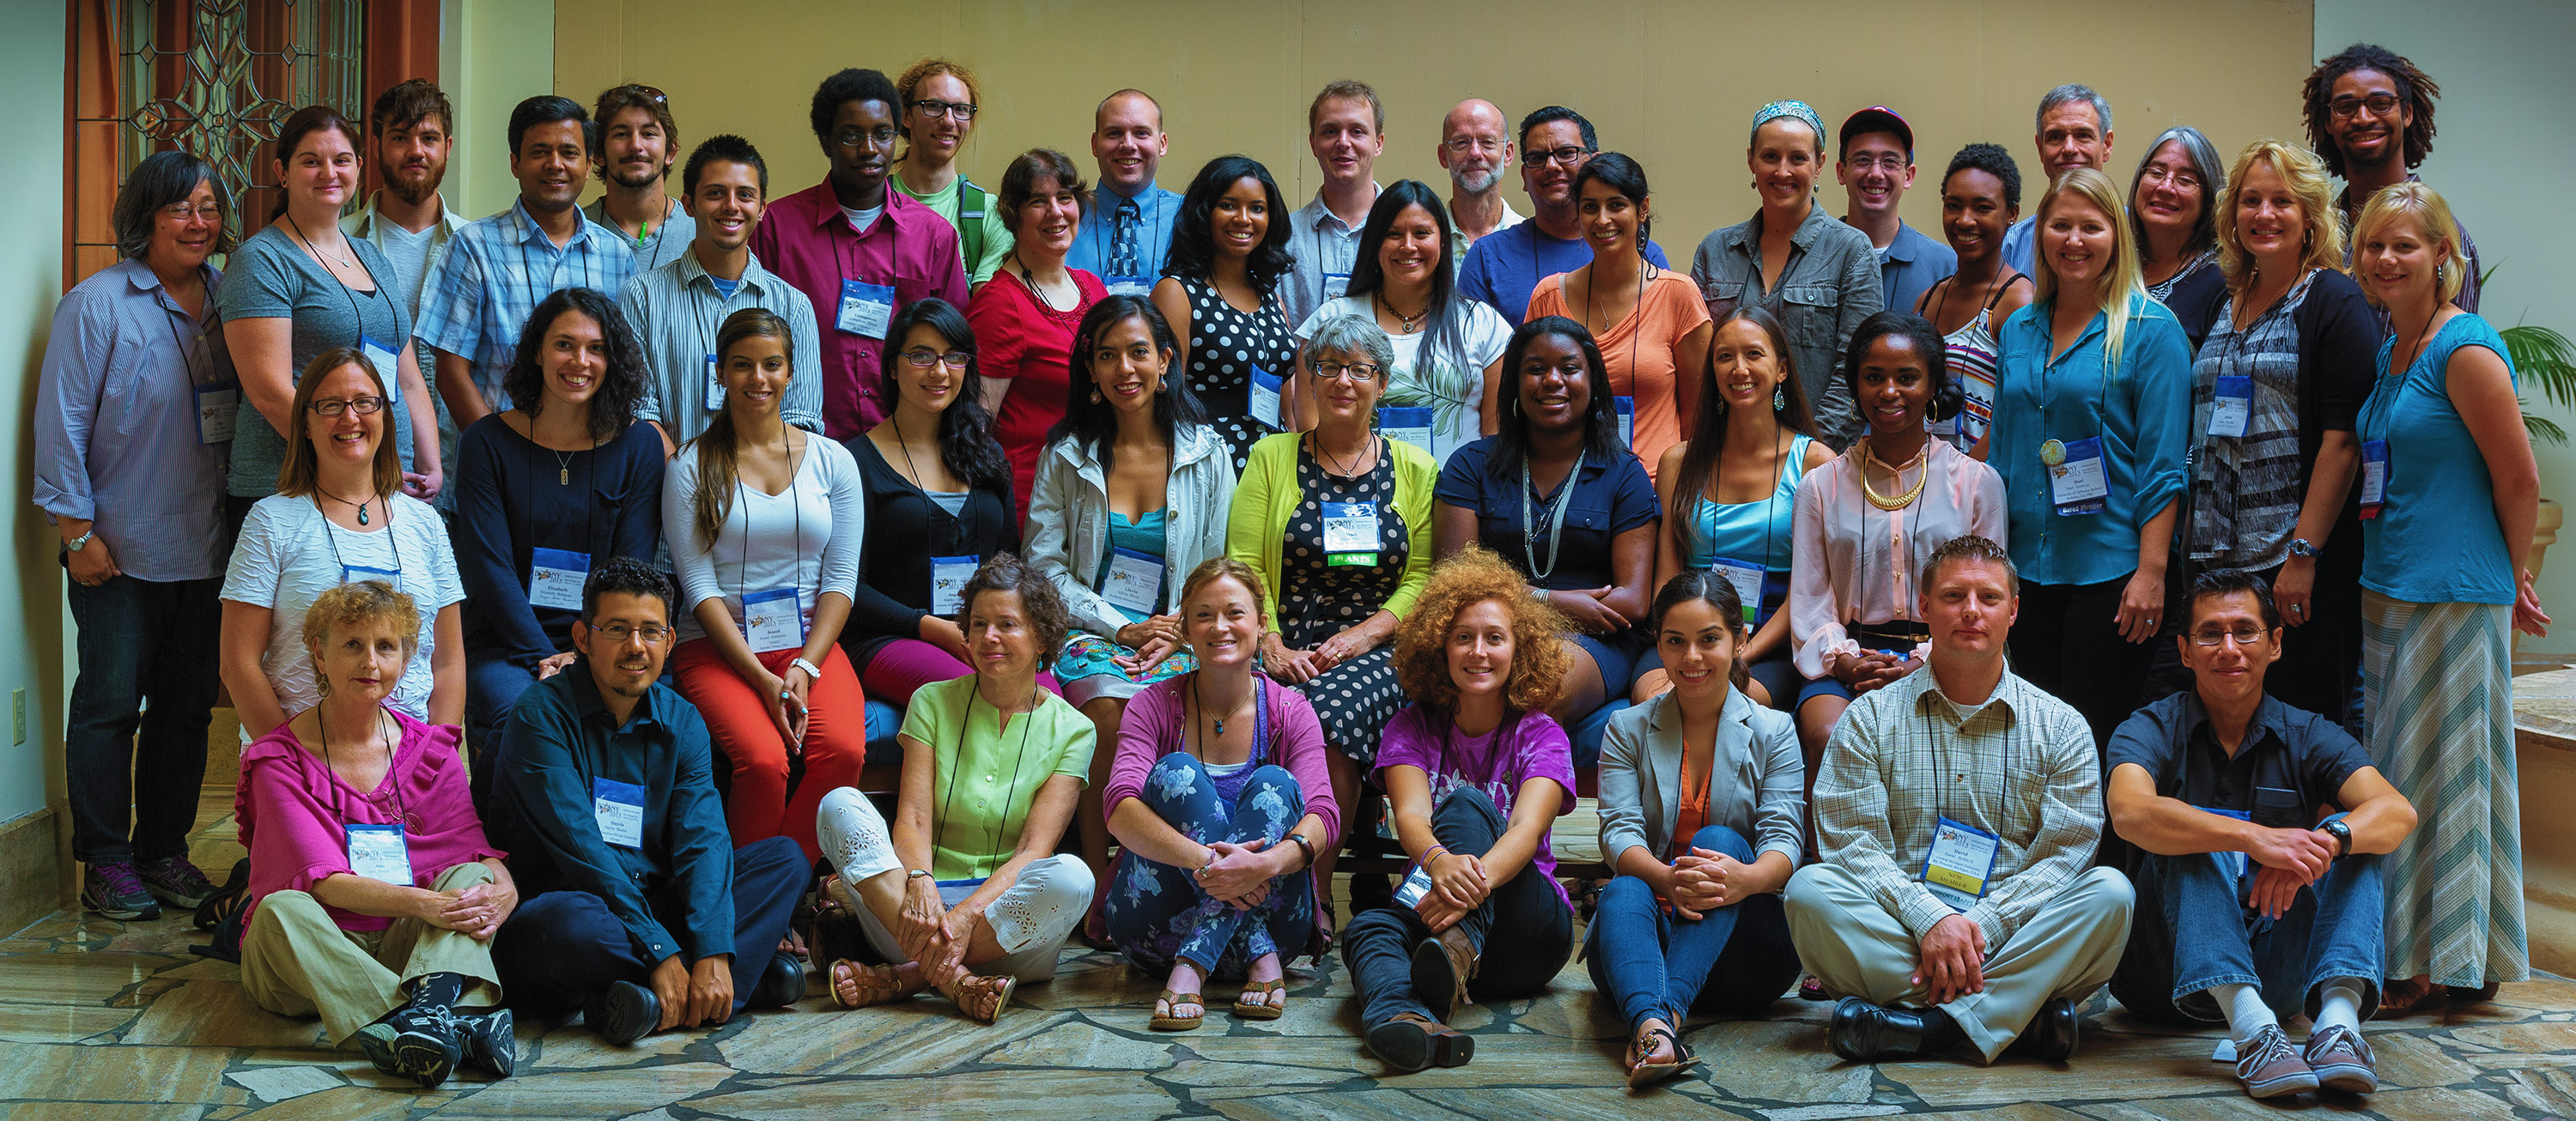 Students and mentors from across the U.S. participated in the PLANTS Grant program in New Orleans this July. Dr. Nina Baghai-Riding, professor of biology and environmental science at Delta State, has been a leading mentor for three years.